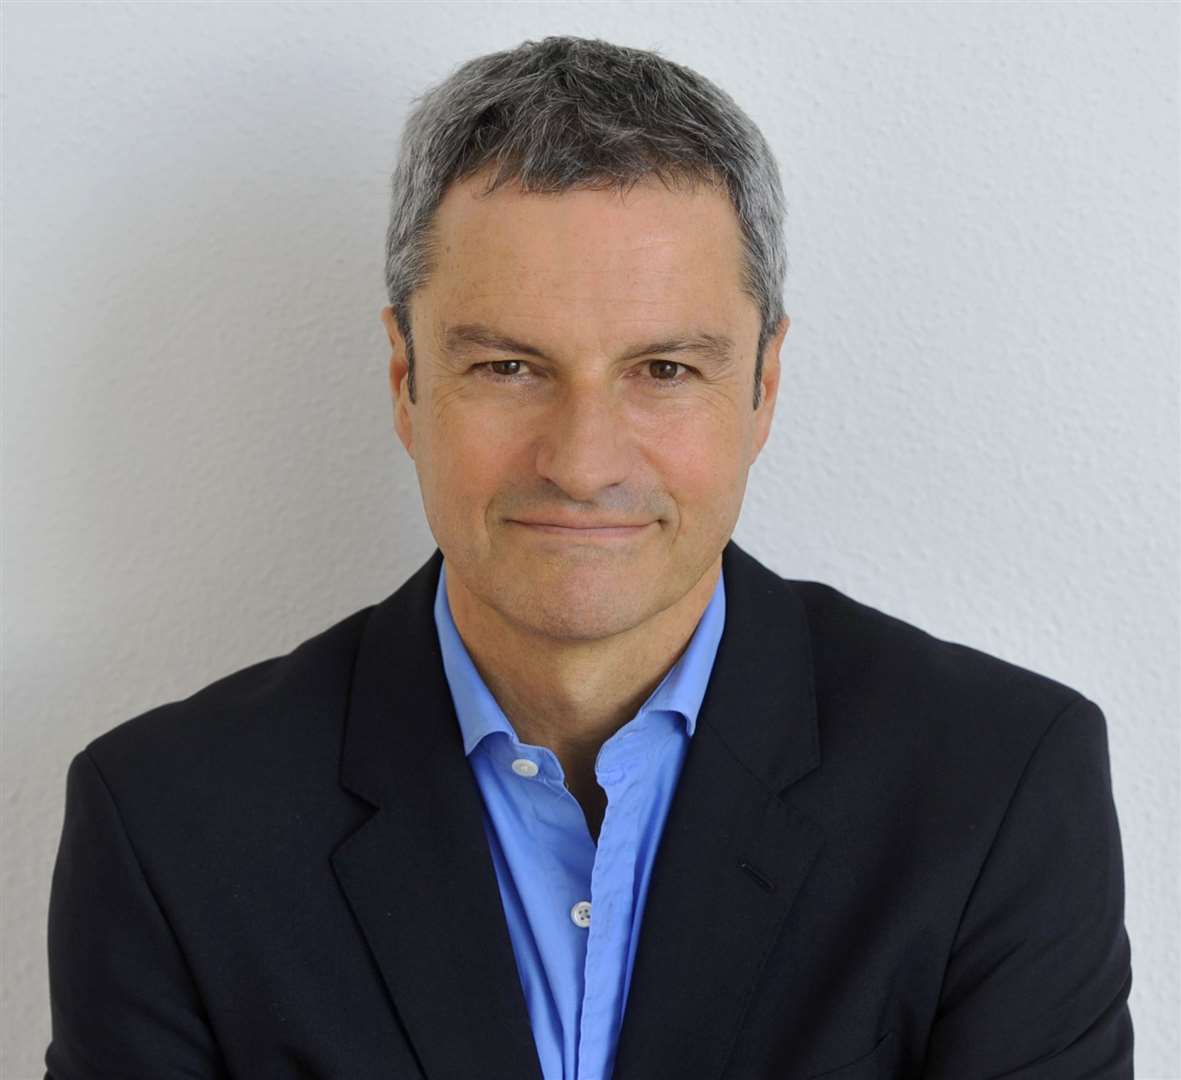 Gavin Esler will be hosting the evening with Prue. Pcture: Jeff Overs